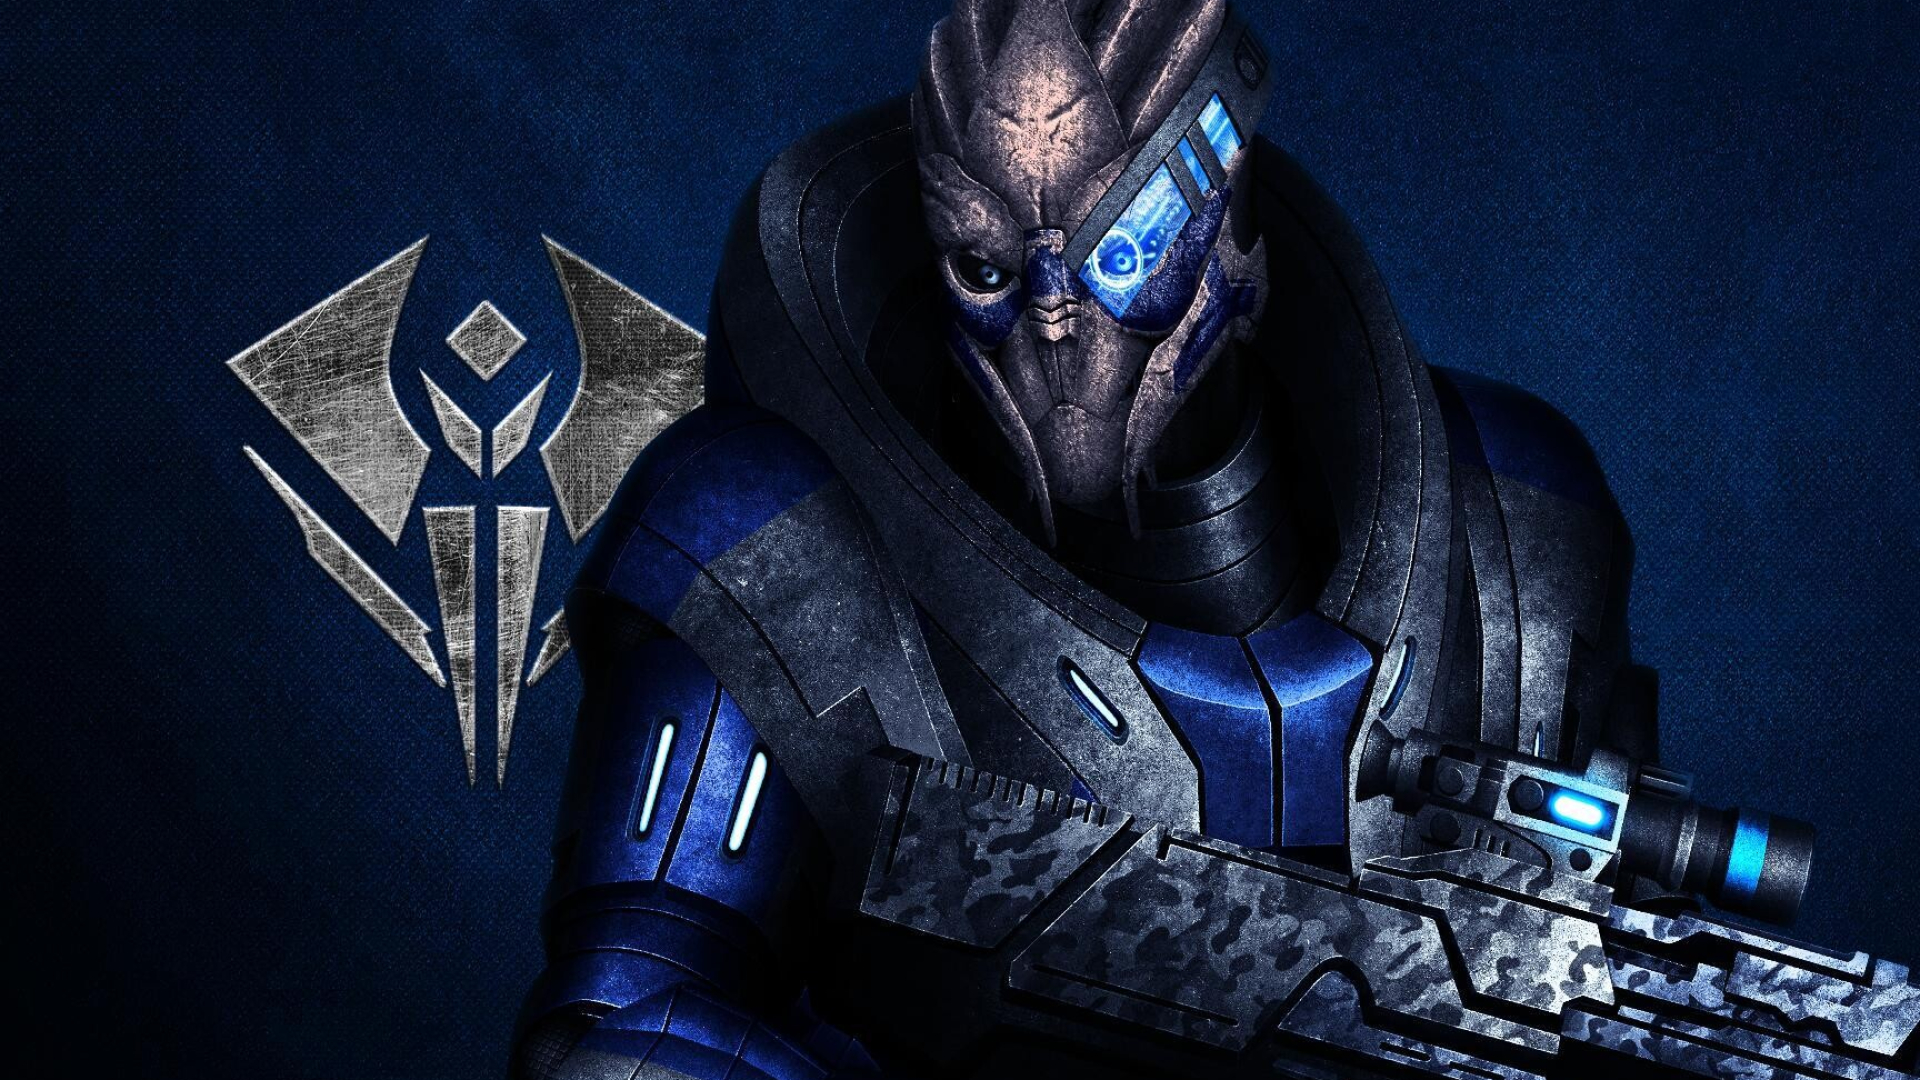 Garrus Vakarian: Excellent sniper, tactical genius, Turian agent and just a good friend for Shepard. 1920x1080 Full HD Background.